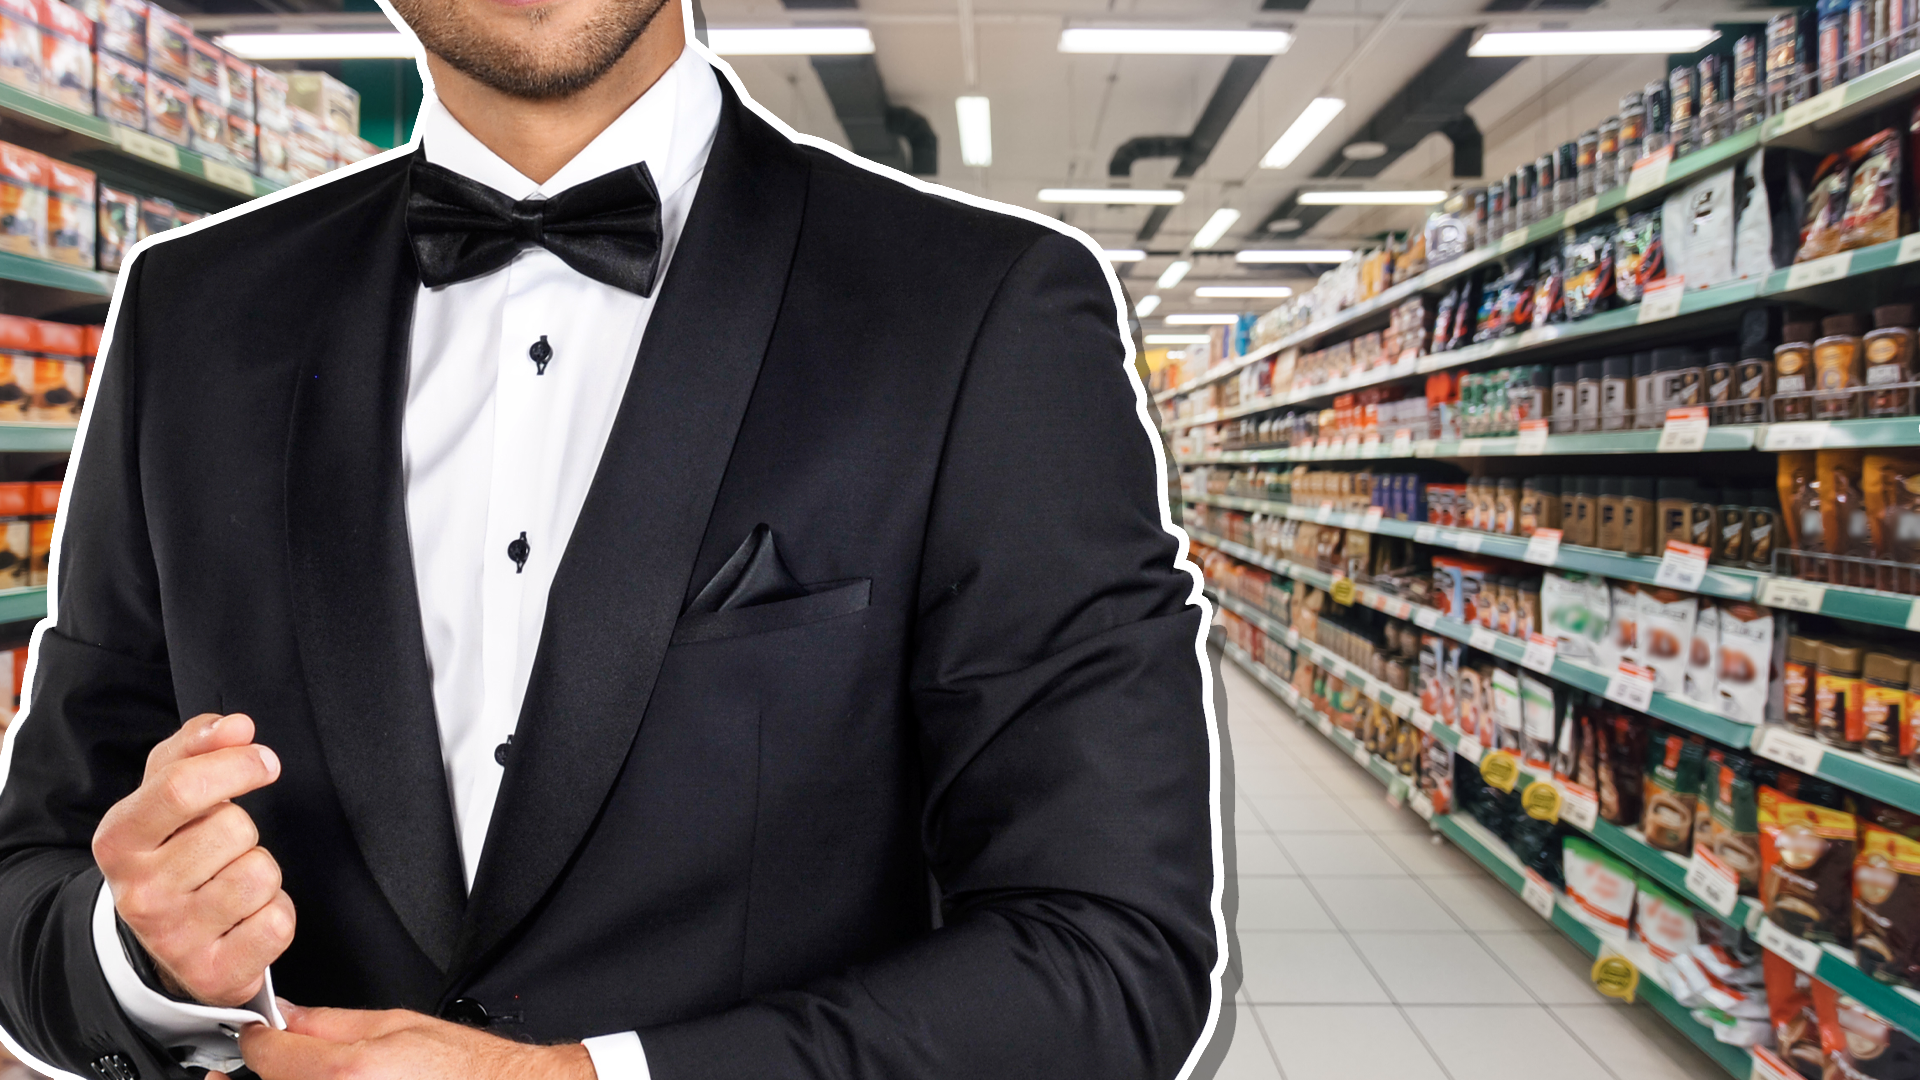 A man in a tuxedo standing in a supermarket